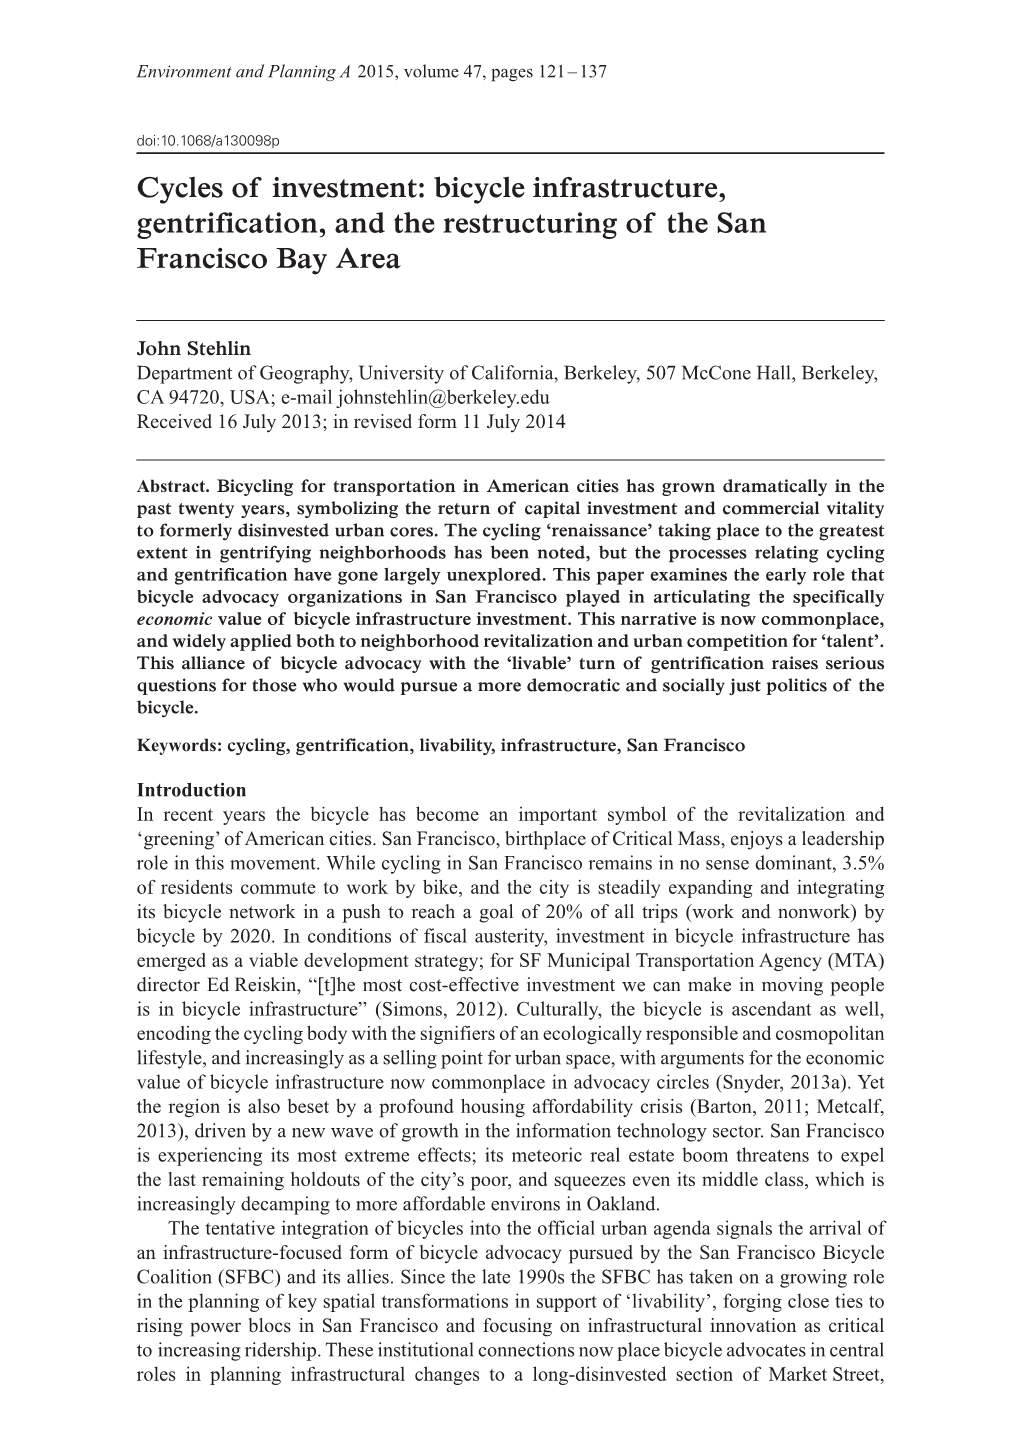 Cycles of Investment: Bicycle Infrastructure, Gentrification, and the Restructuring of the San Francisco Bay Area